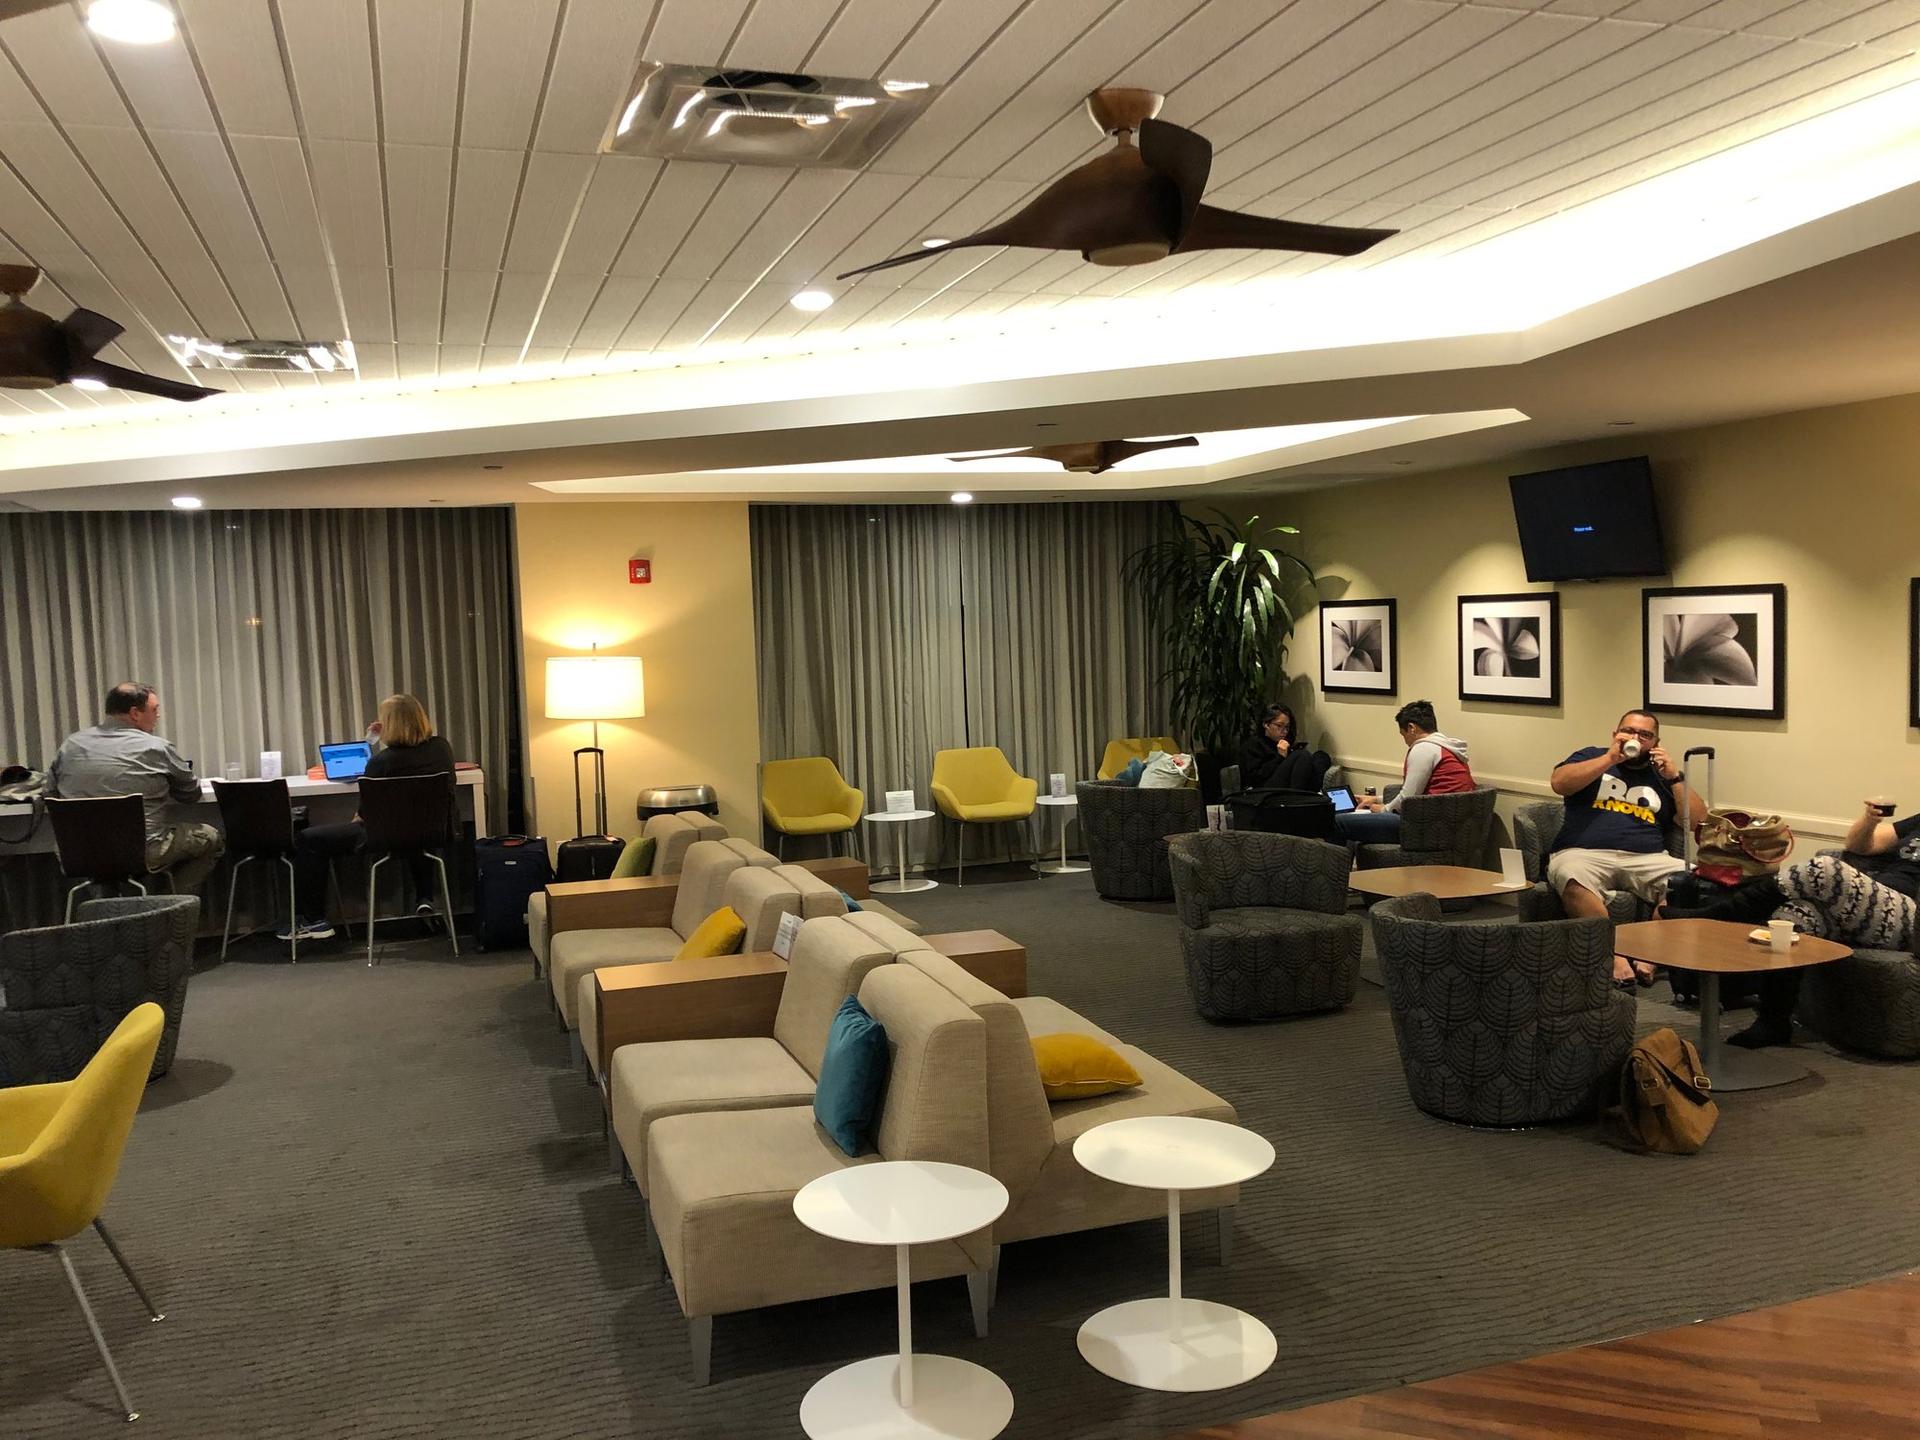 Hawaiian Airlines The Plumeria Lounge image 32 of 41